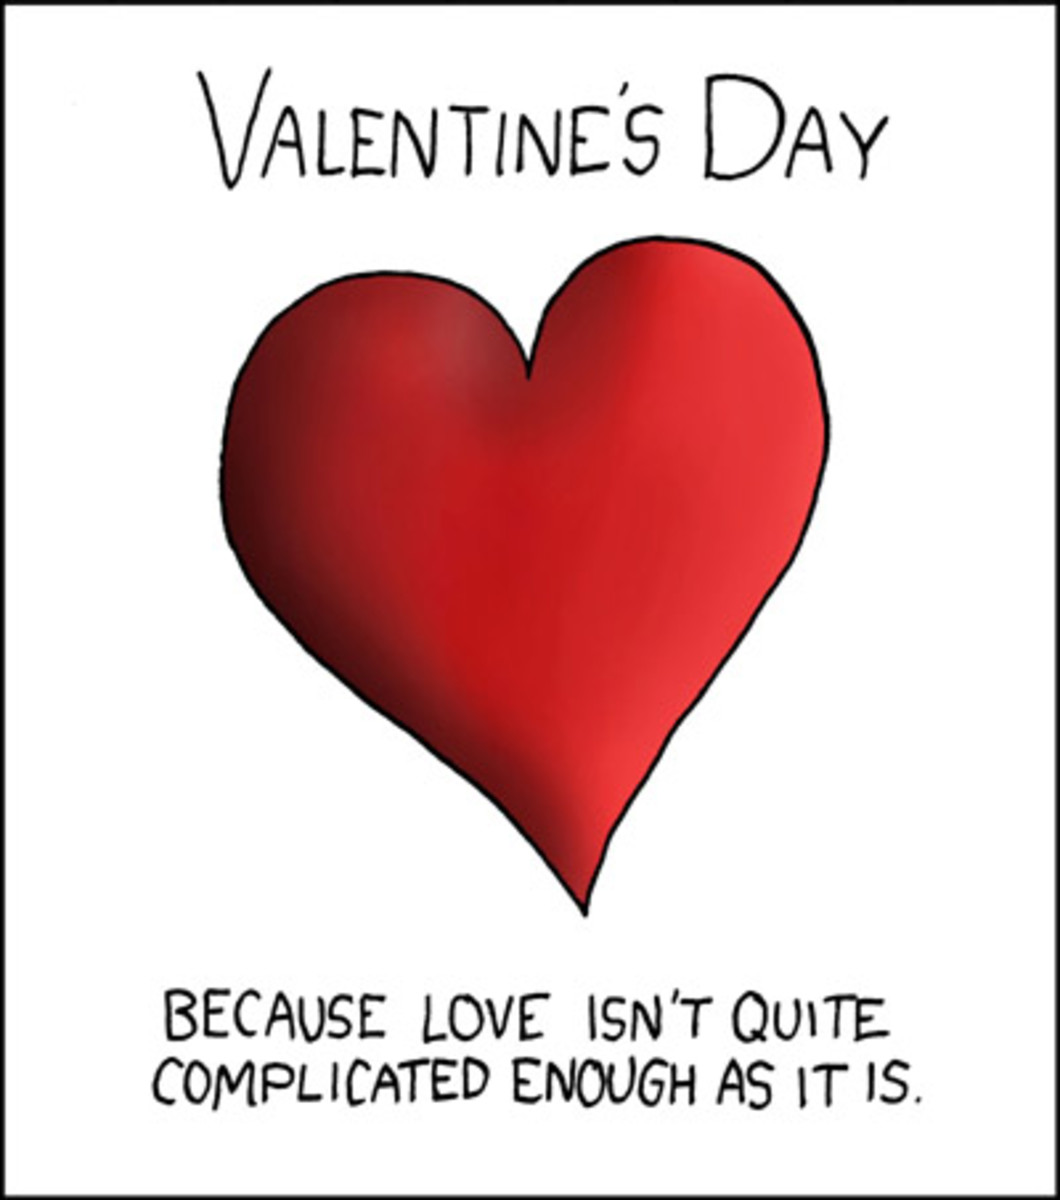 Do you look forward to Valentine's Day? Or do you resent the pressure it applies to romantic relationships? 